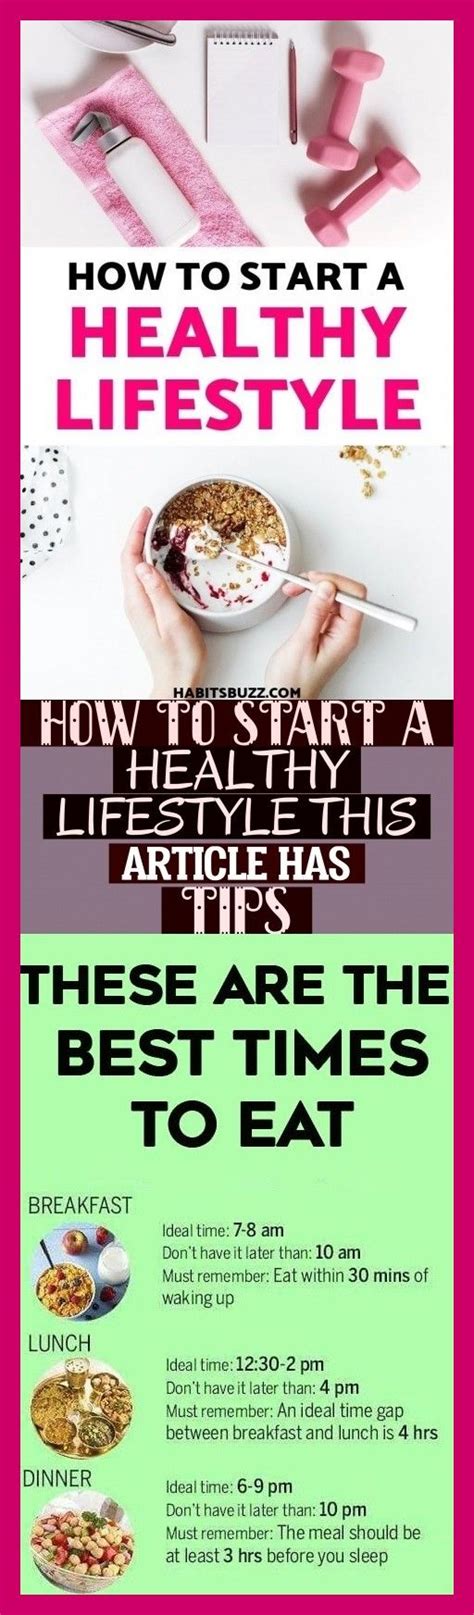 How To Start A Healthy Lifestyle This Article Has Tips ...